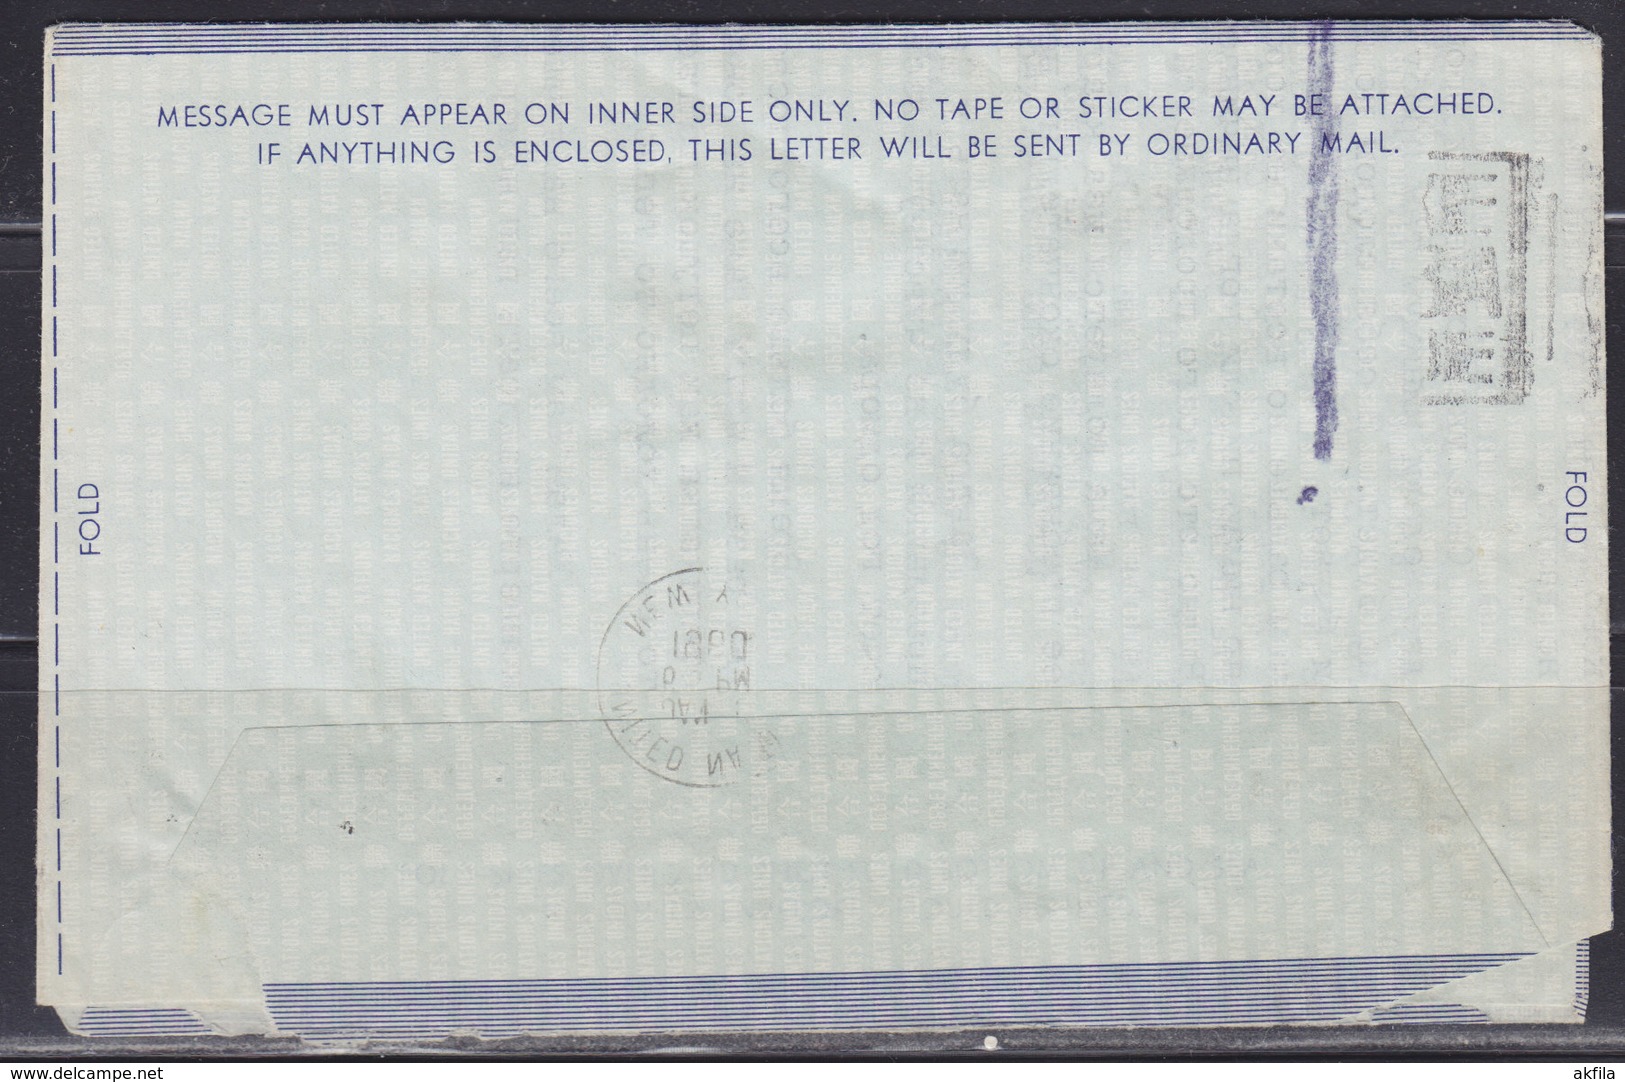 United Nations (New York) 1960 Air Letter (Aerogramme) To Beograd (YU) - Airmail